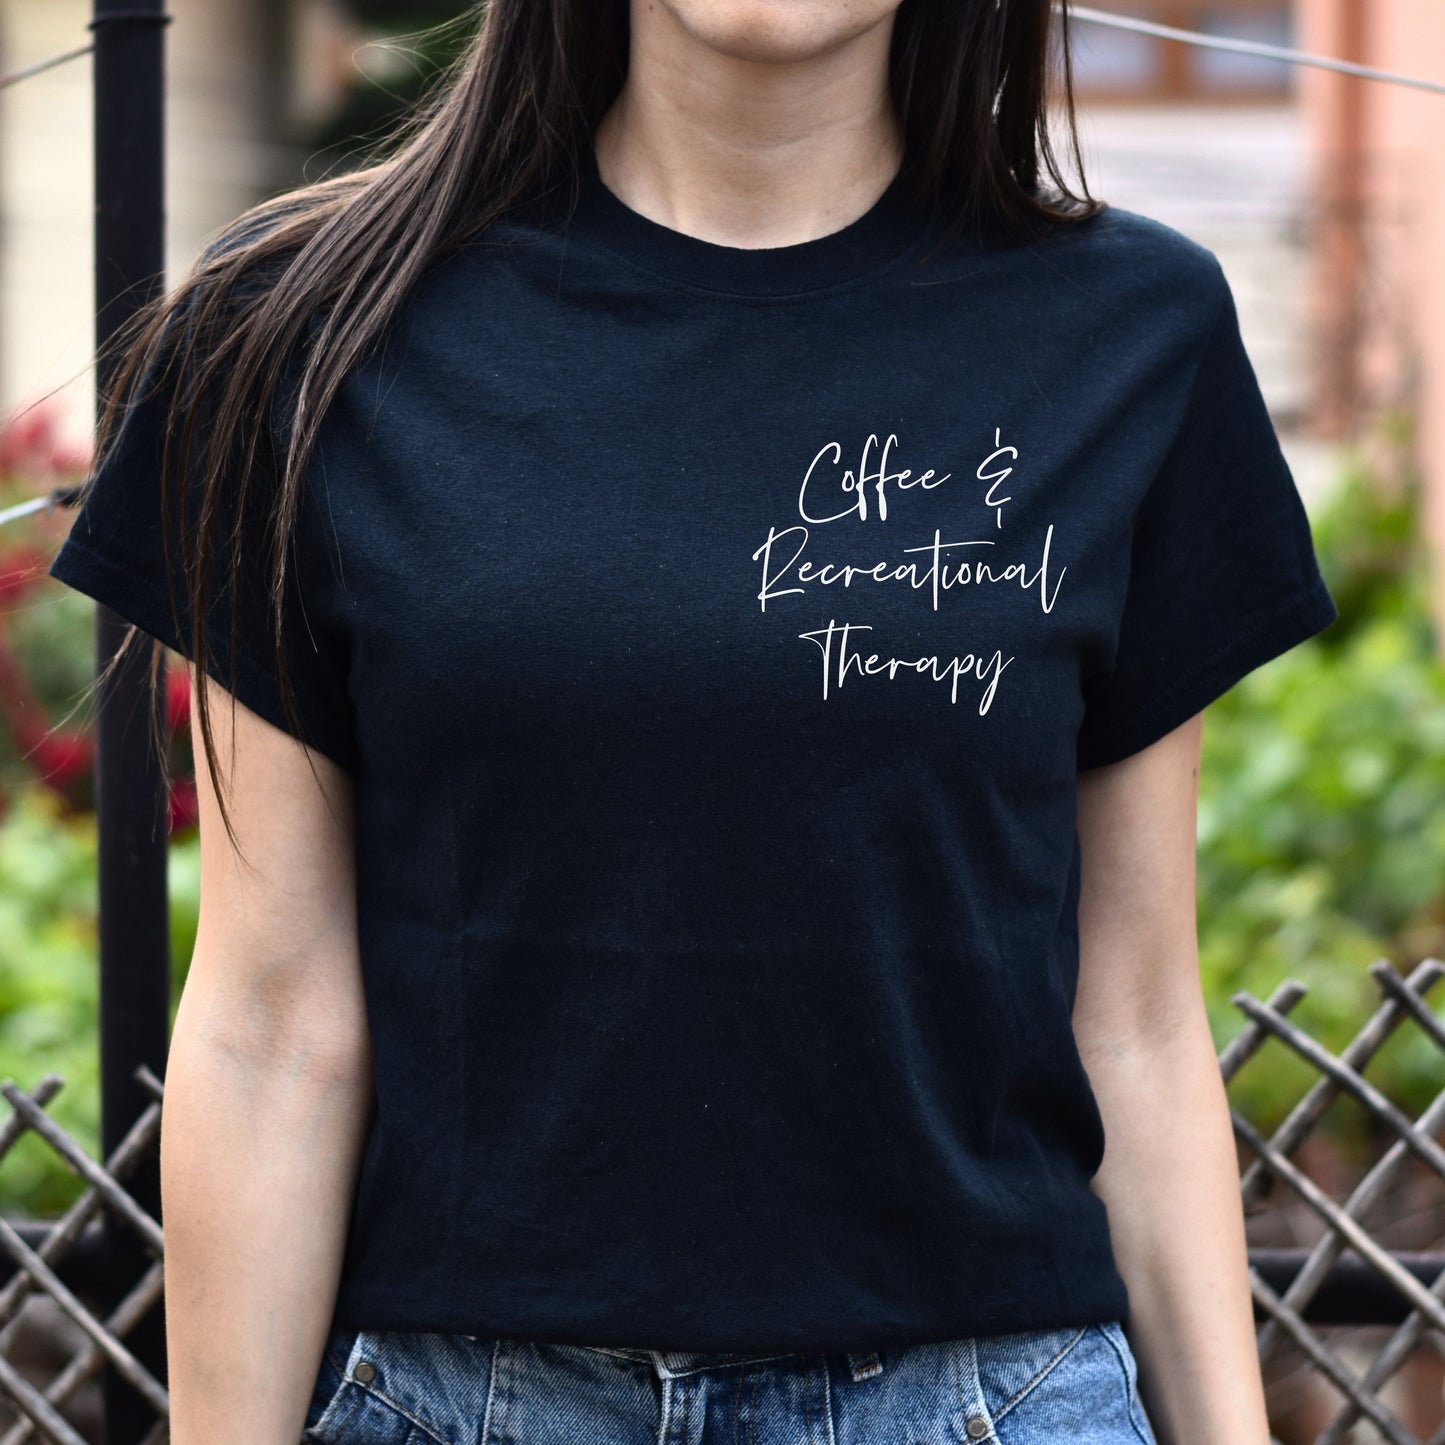 Coffee and recreational therapy pocket Unisex T-shirt RT tee Black Navy Dark Heather-Family-Gift-Planet